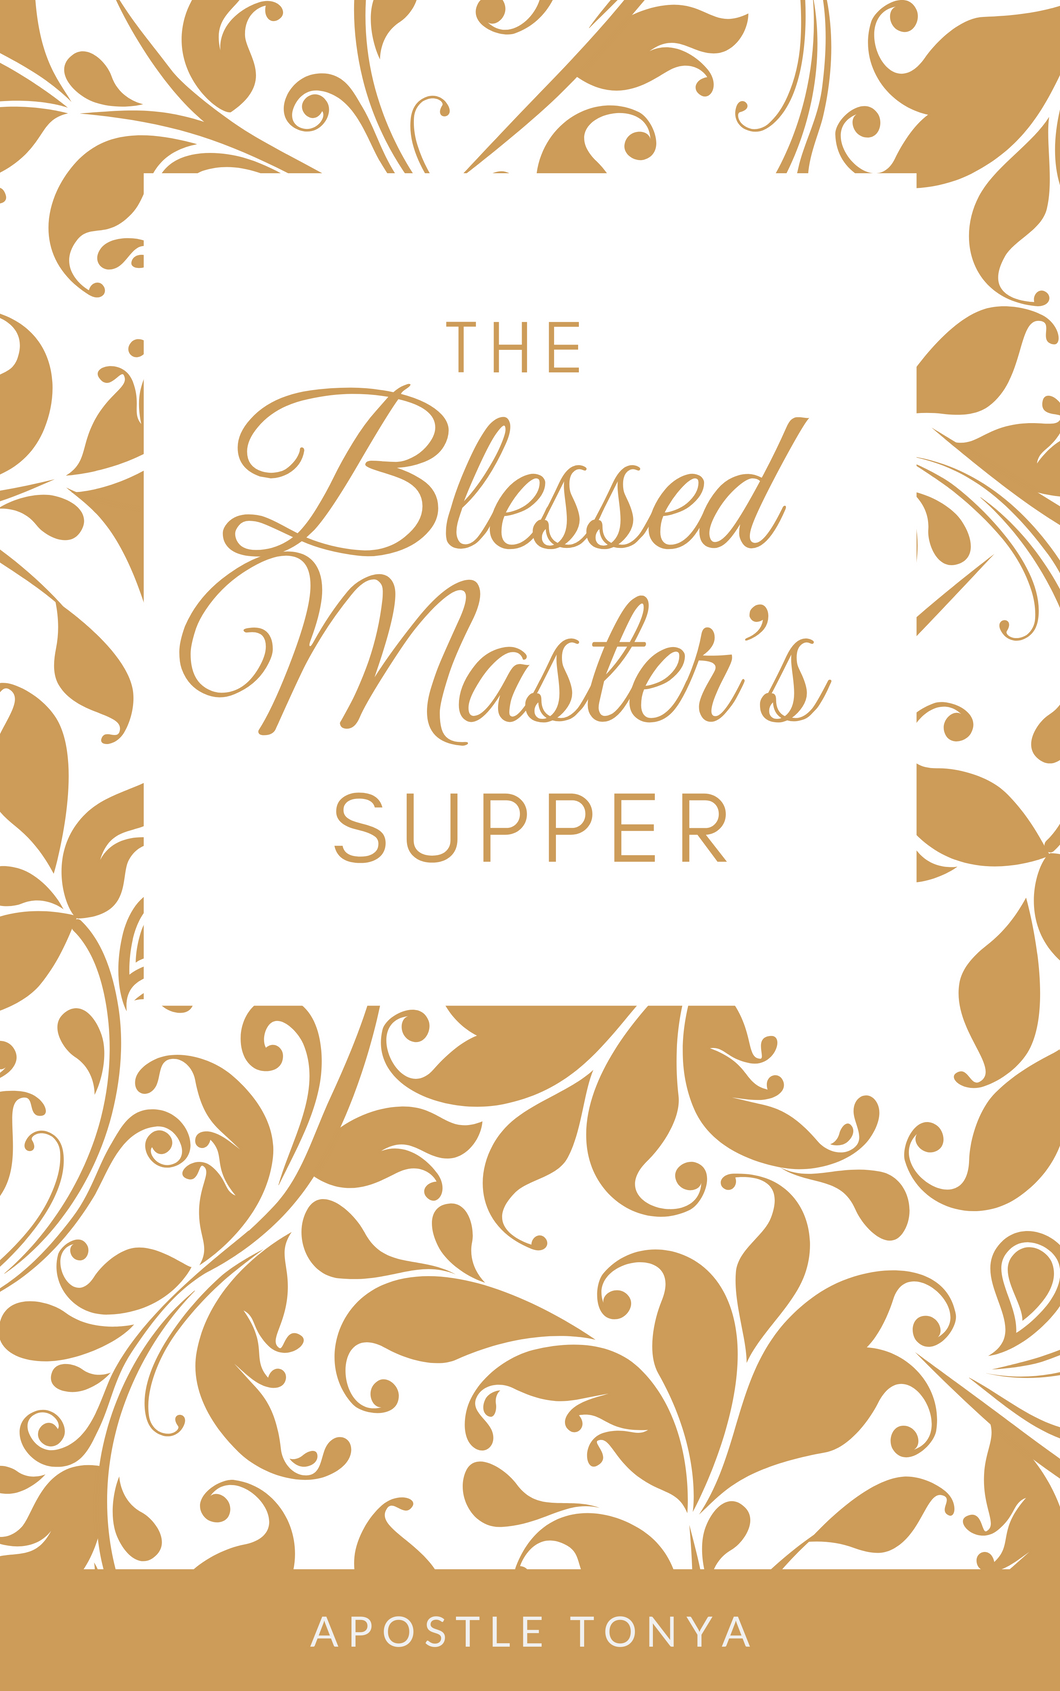 The Blessed Master's Supper